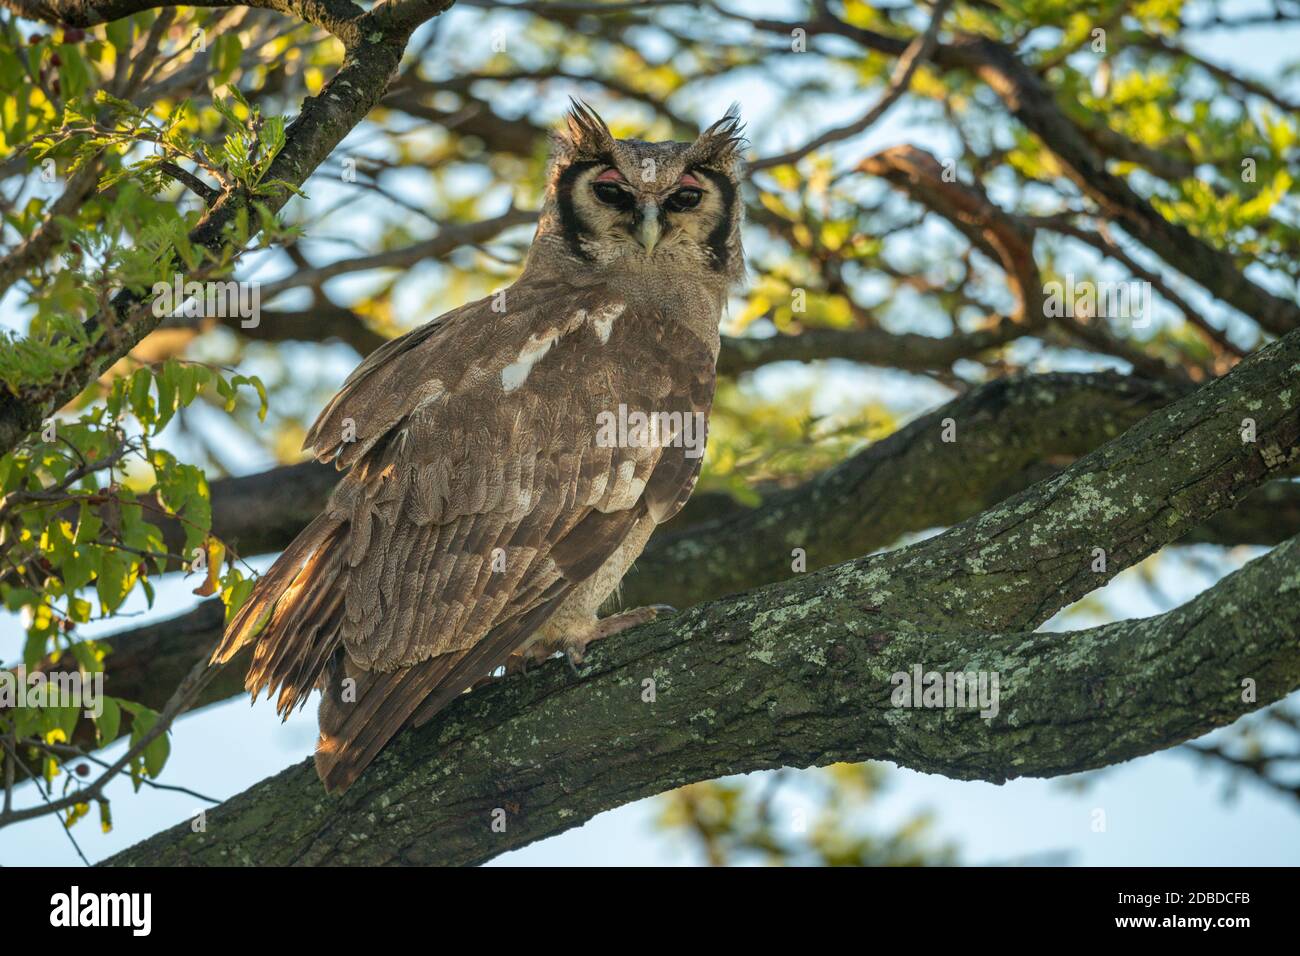 Verreaux eagle-owl eyes camera from lichen-covered branch Stock Photo